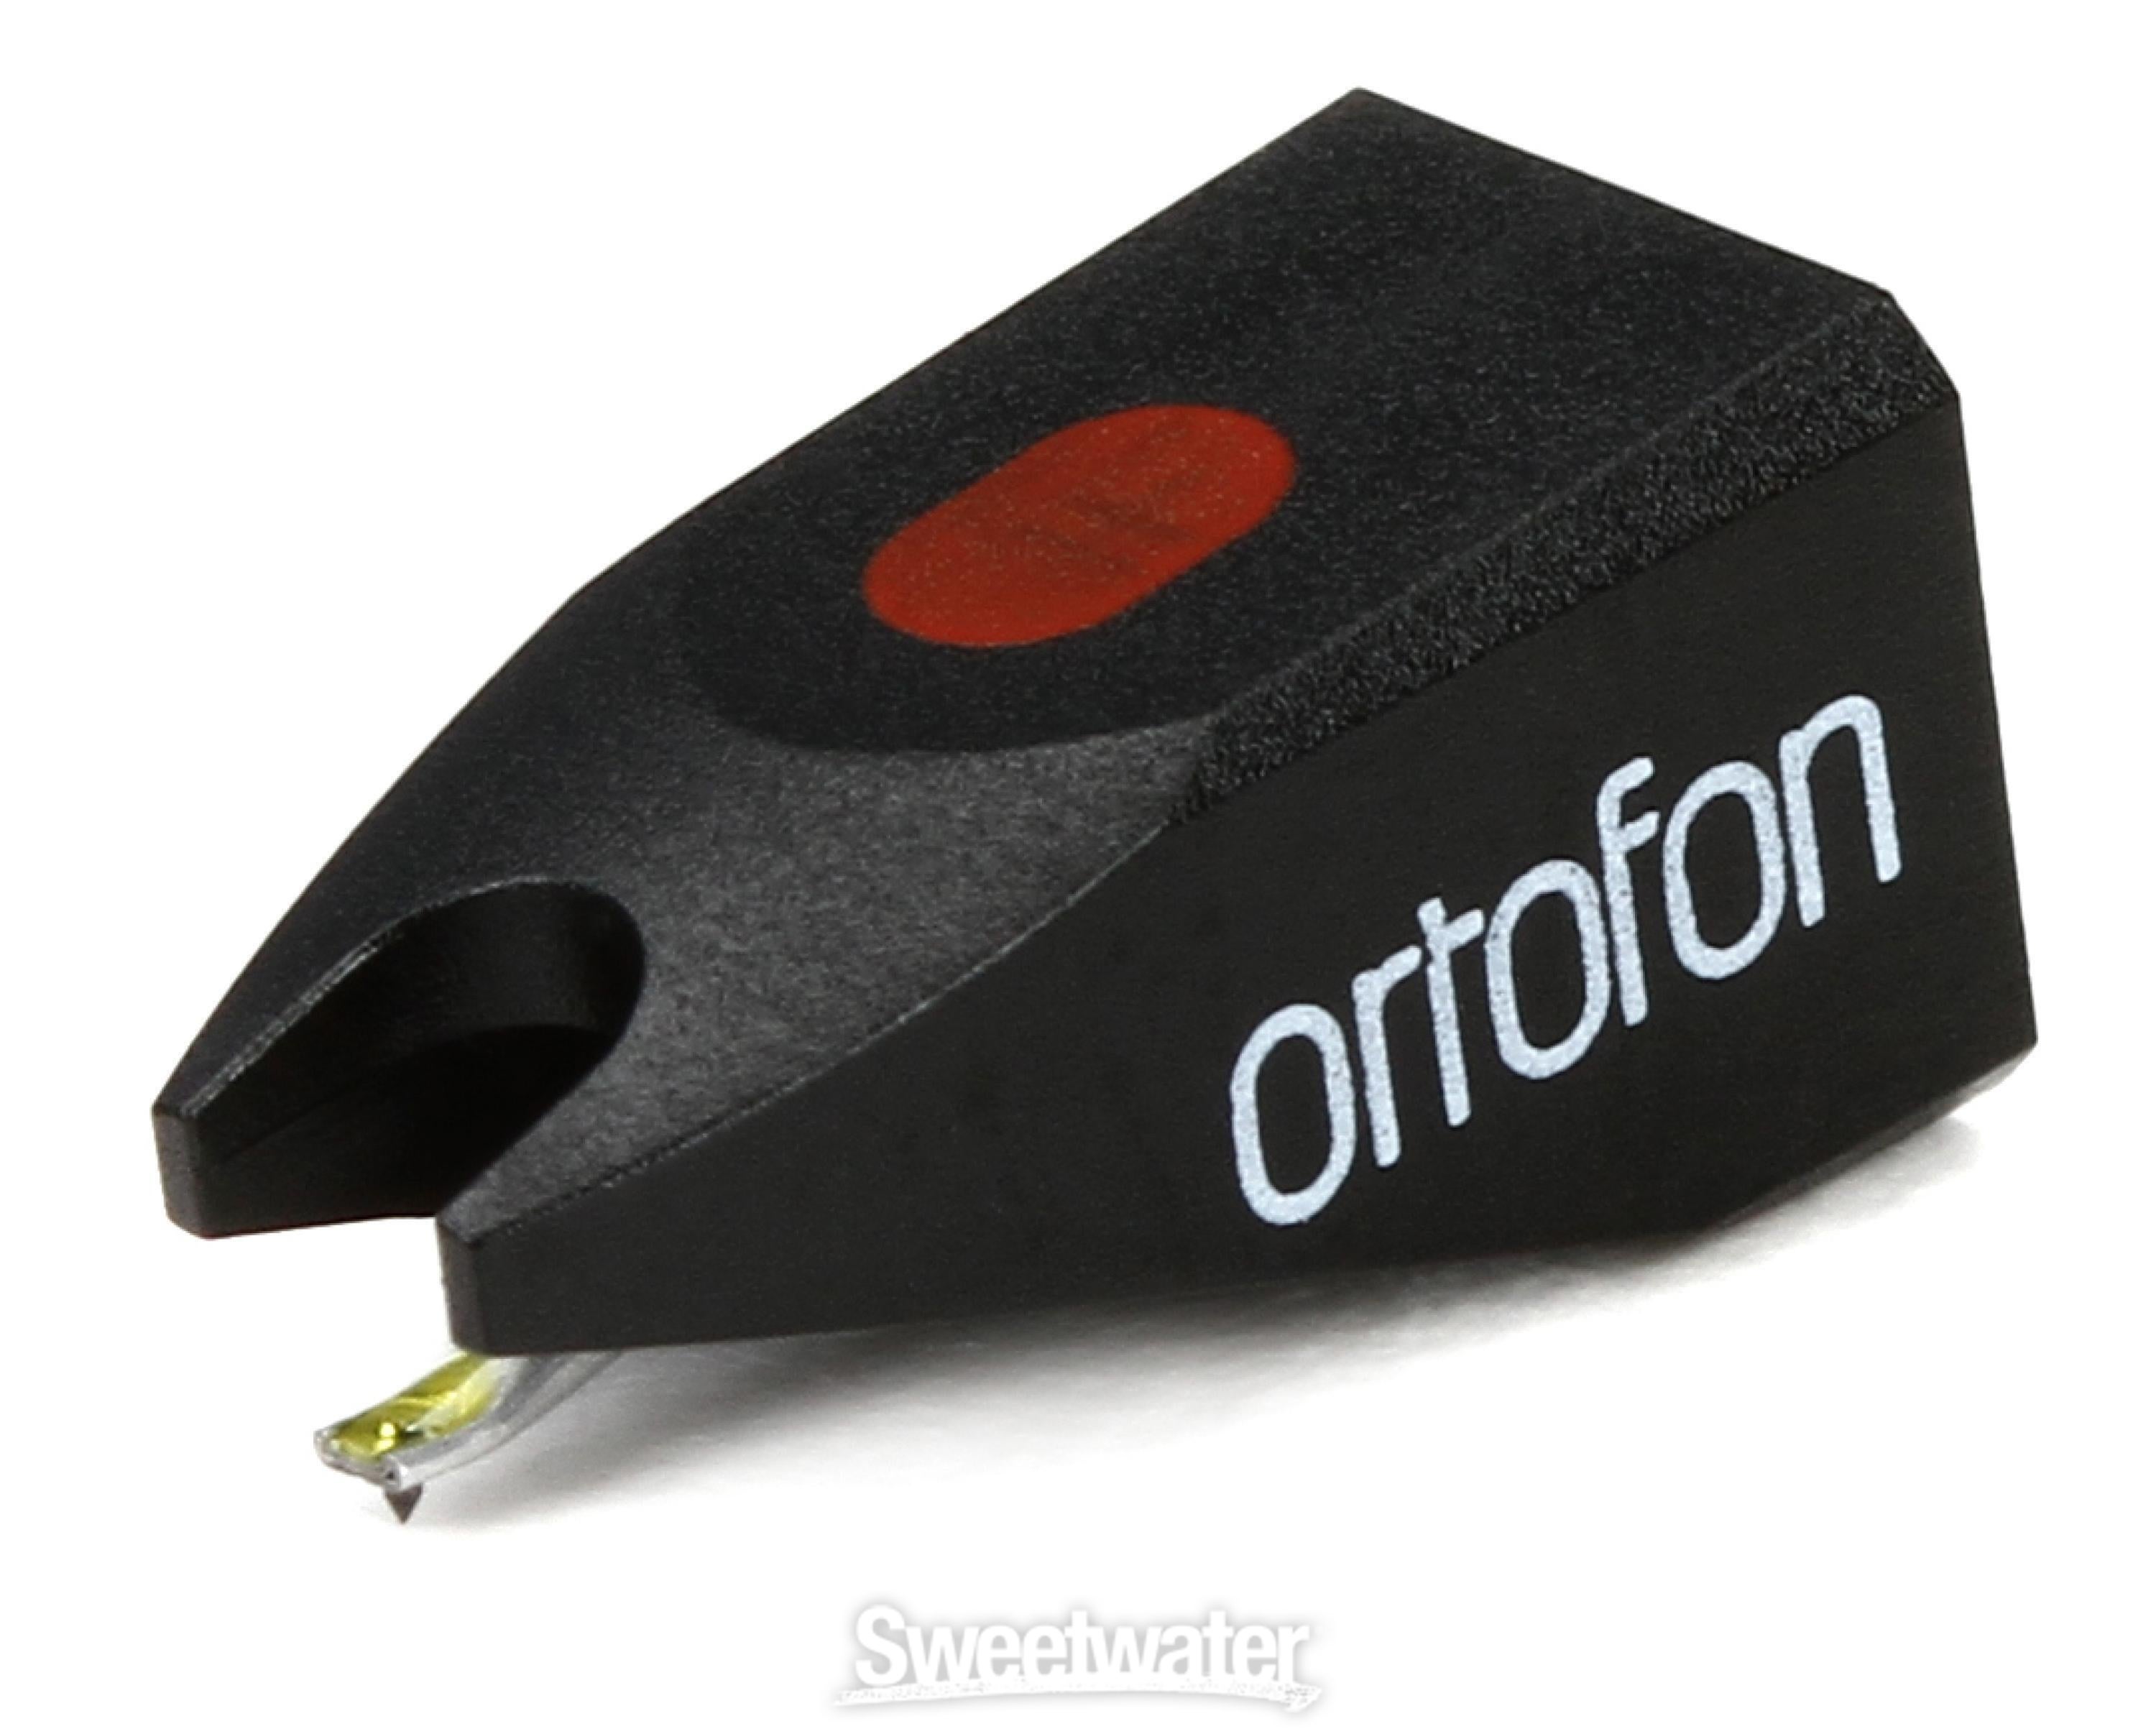 Ortofon Pro S OM Replacement Stylus Replacement Stylus for DJ Cartridge